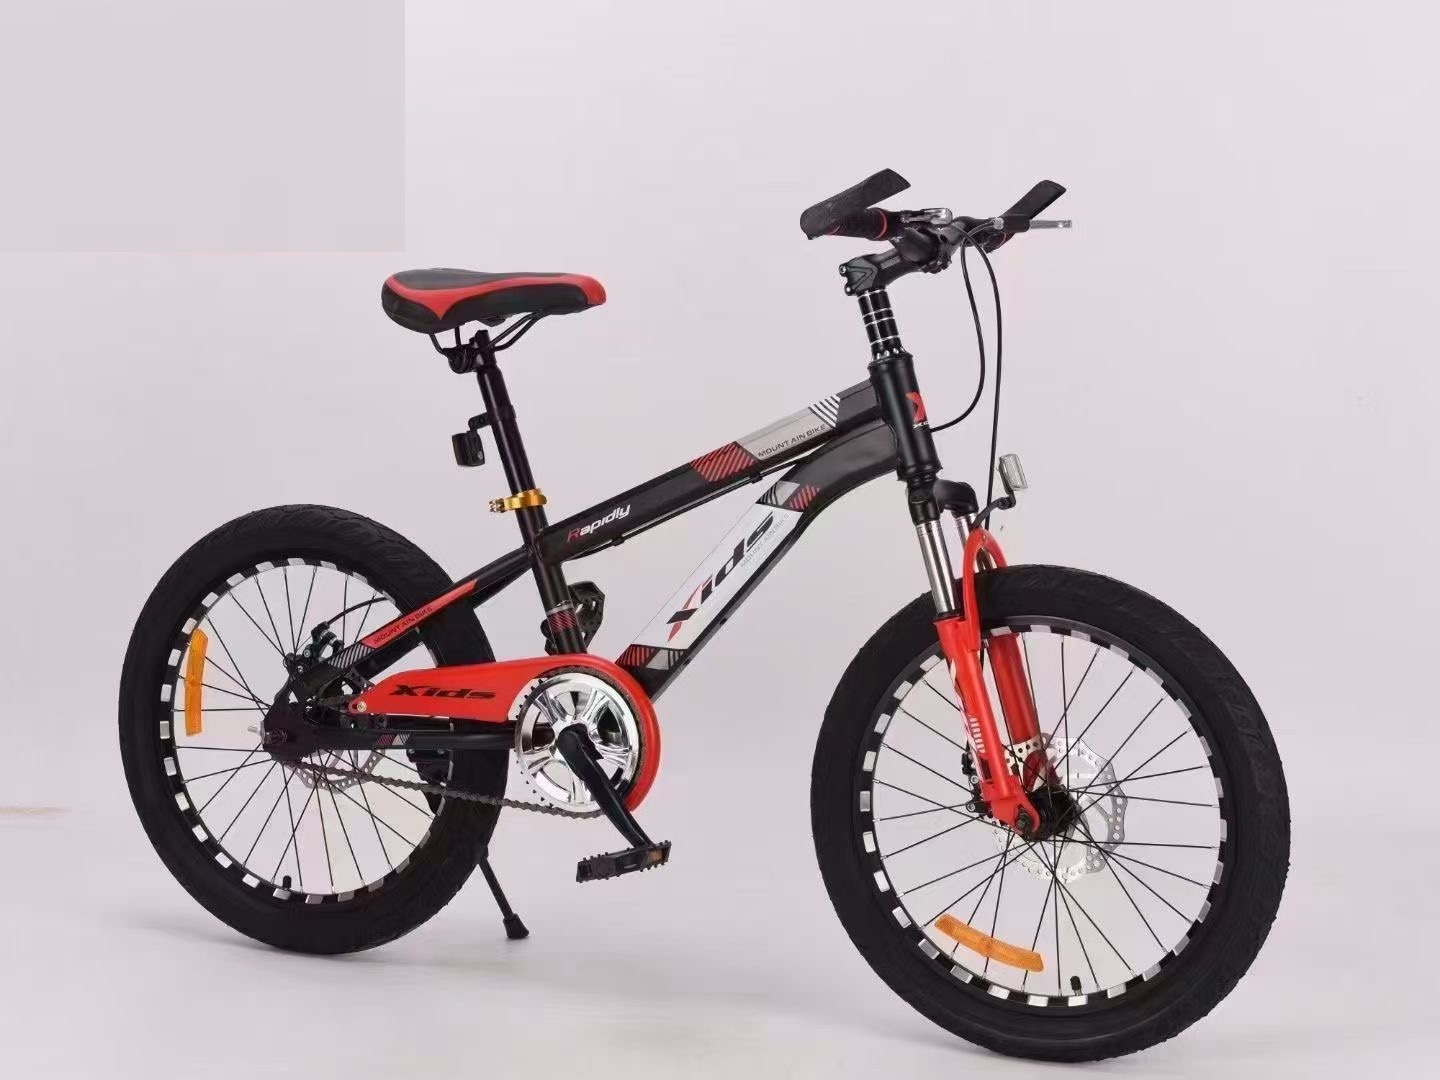 Best selling high quality 12 14 16 inch children bicycle with training wheels child kids bikes